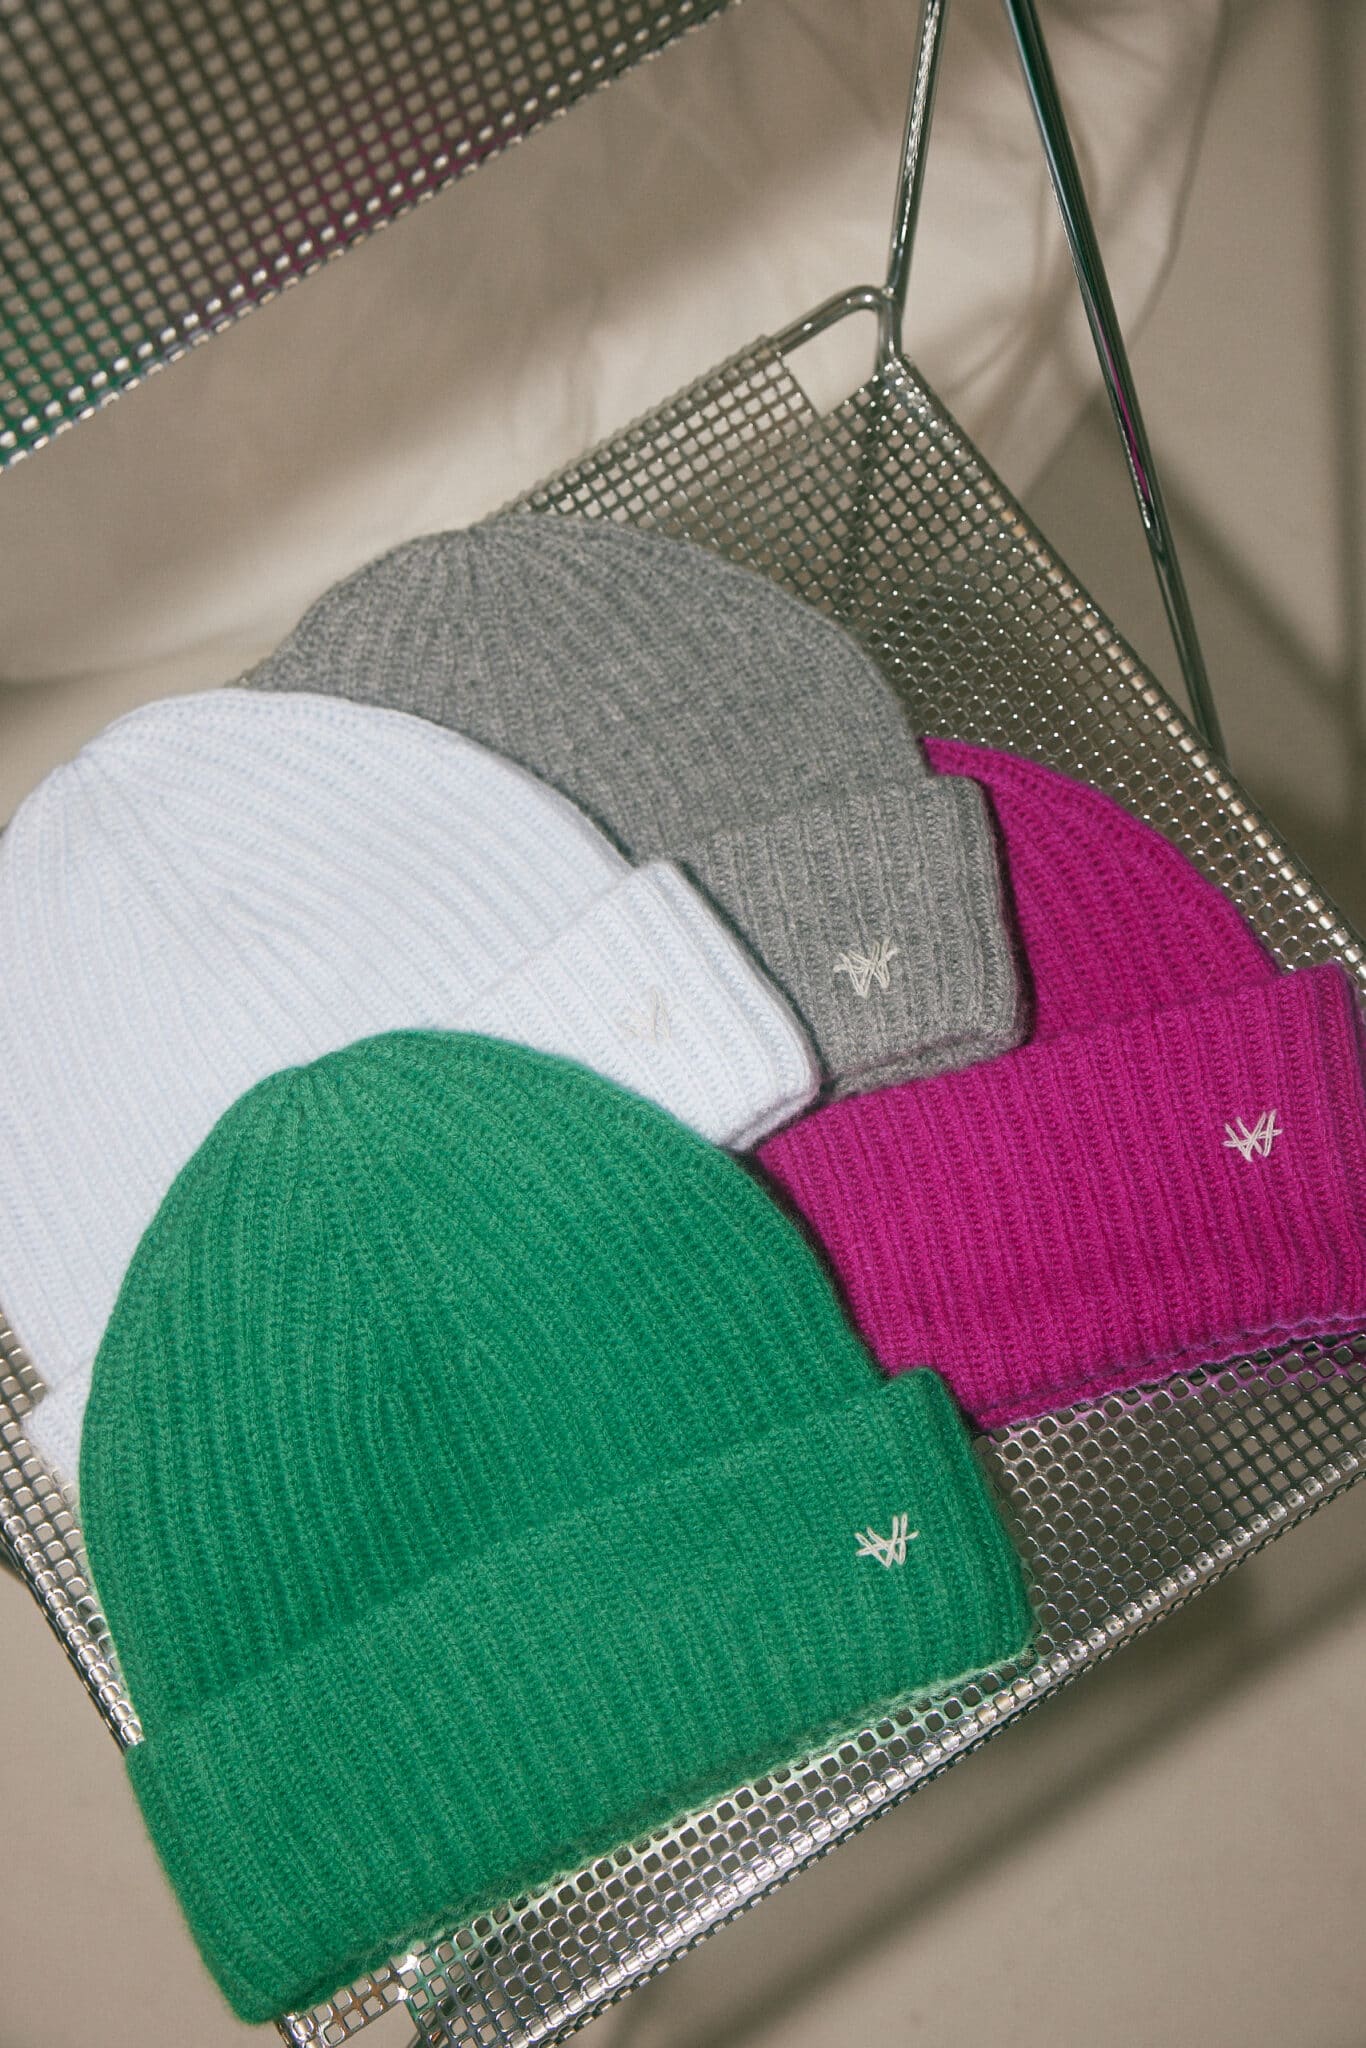 Our soft cashmere accessories from Wuth Copenhagen.